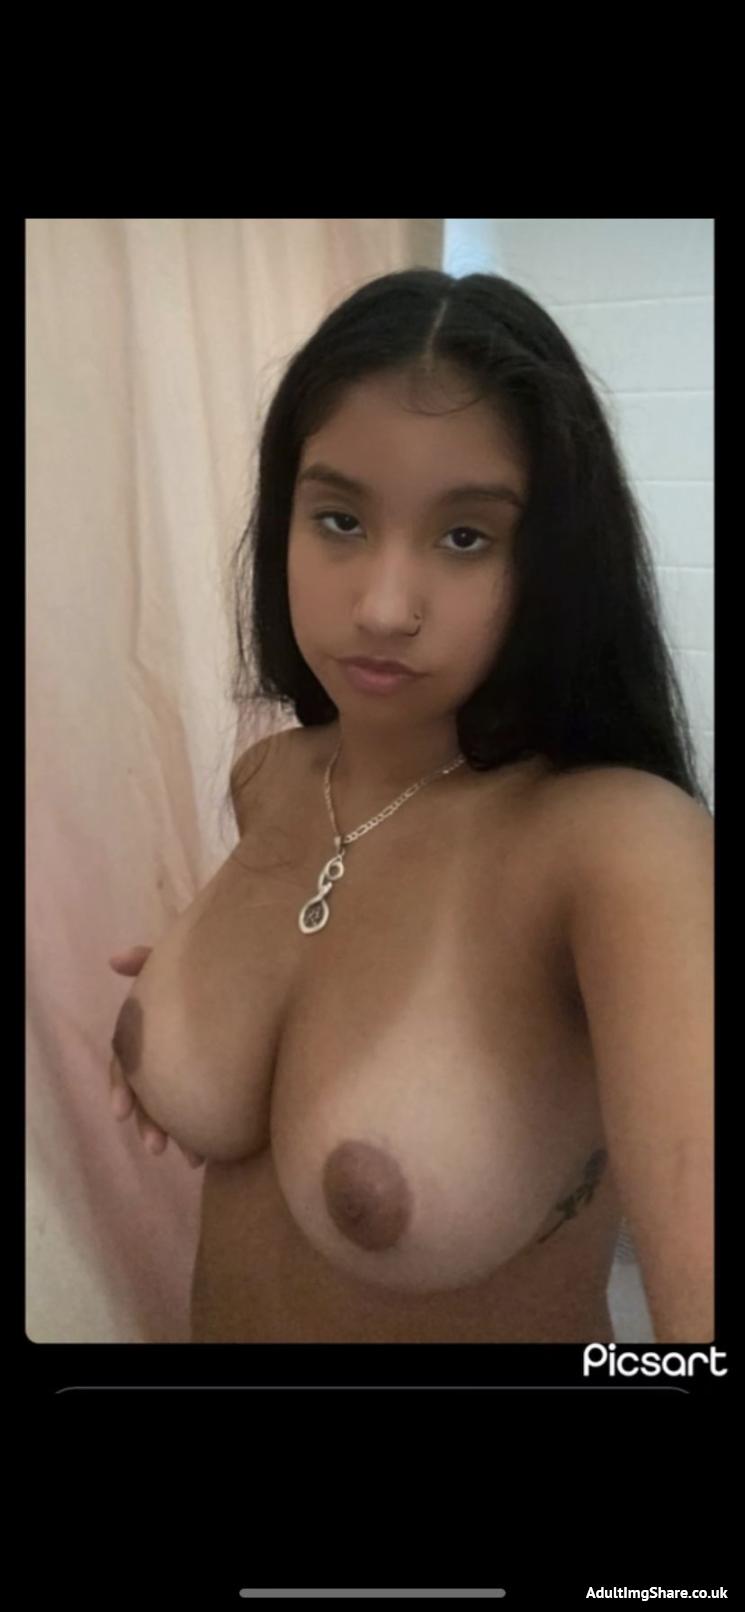 desi banks recommends puerto rican nude selfies pic